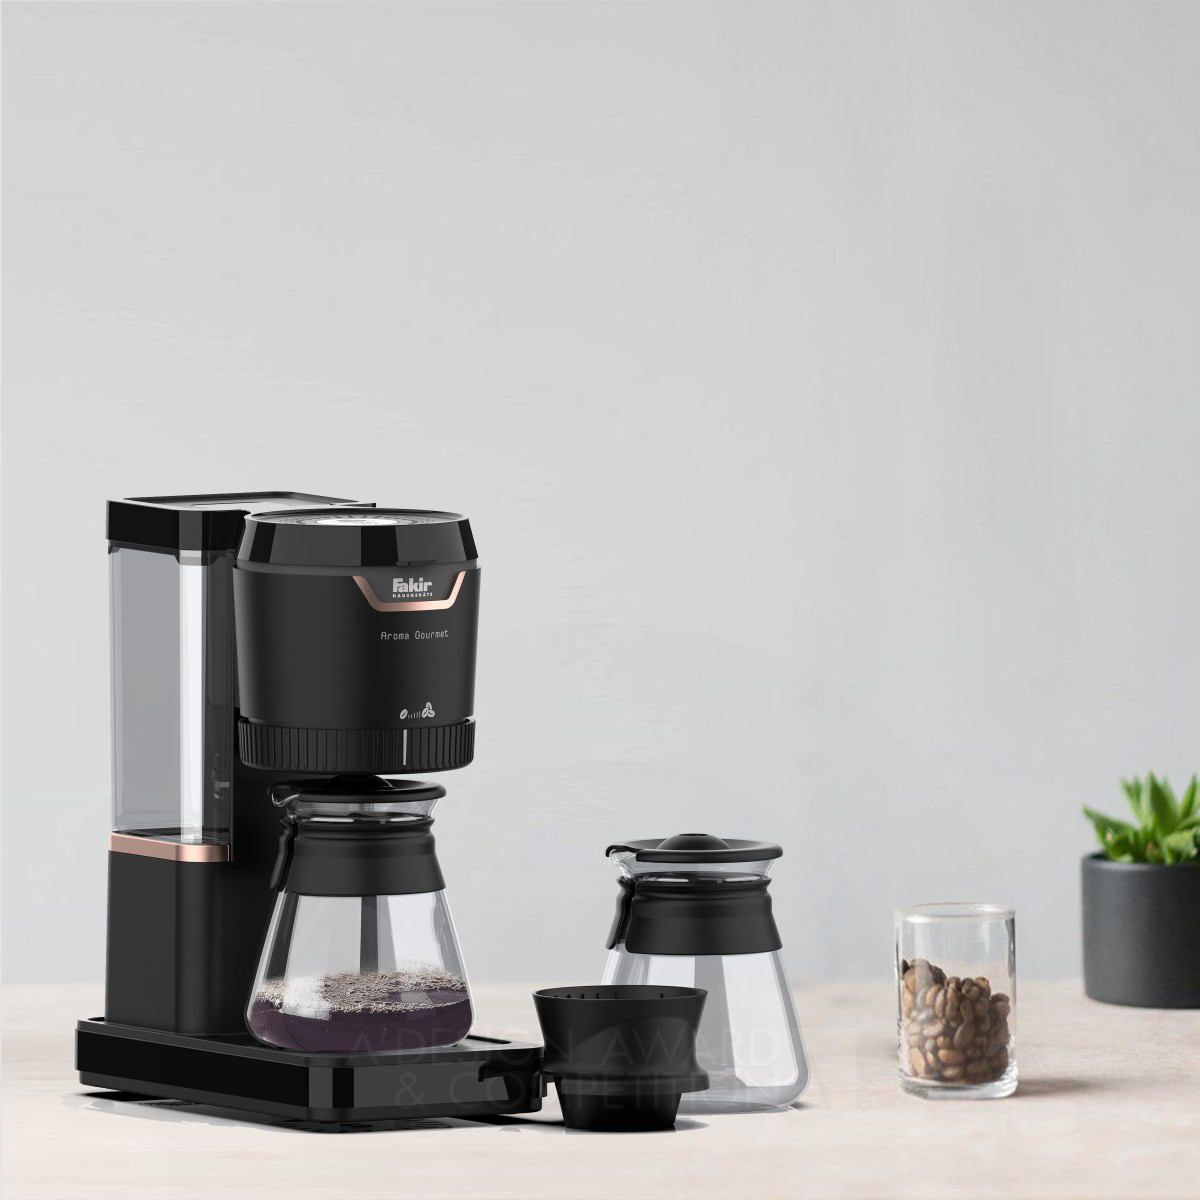 MELTEM CETINKAYA wins Silver at the prestigious A' Home Appliances Design Award with Aroma Gourmet Filter Coffee Machine.